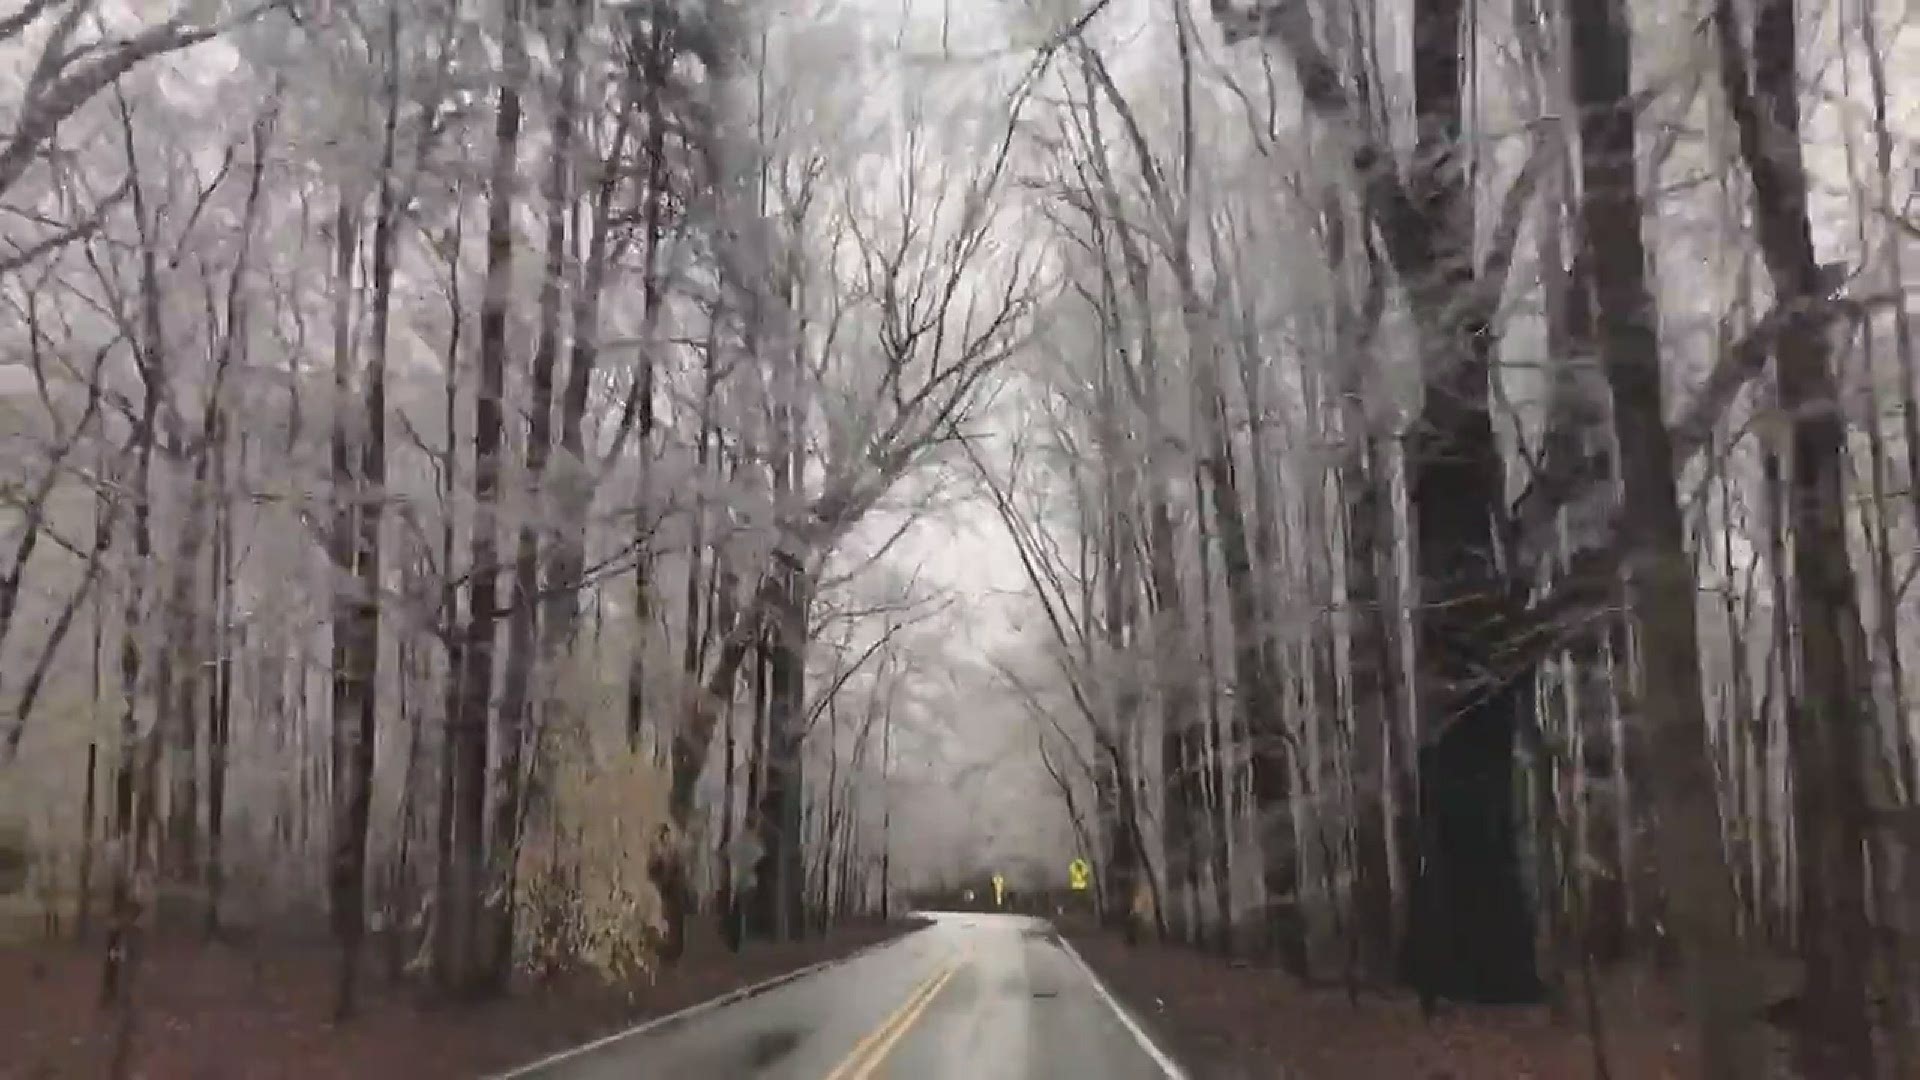 The trees at Battleground Park in Greensboro were covered in ice Thursday!